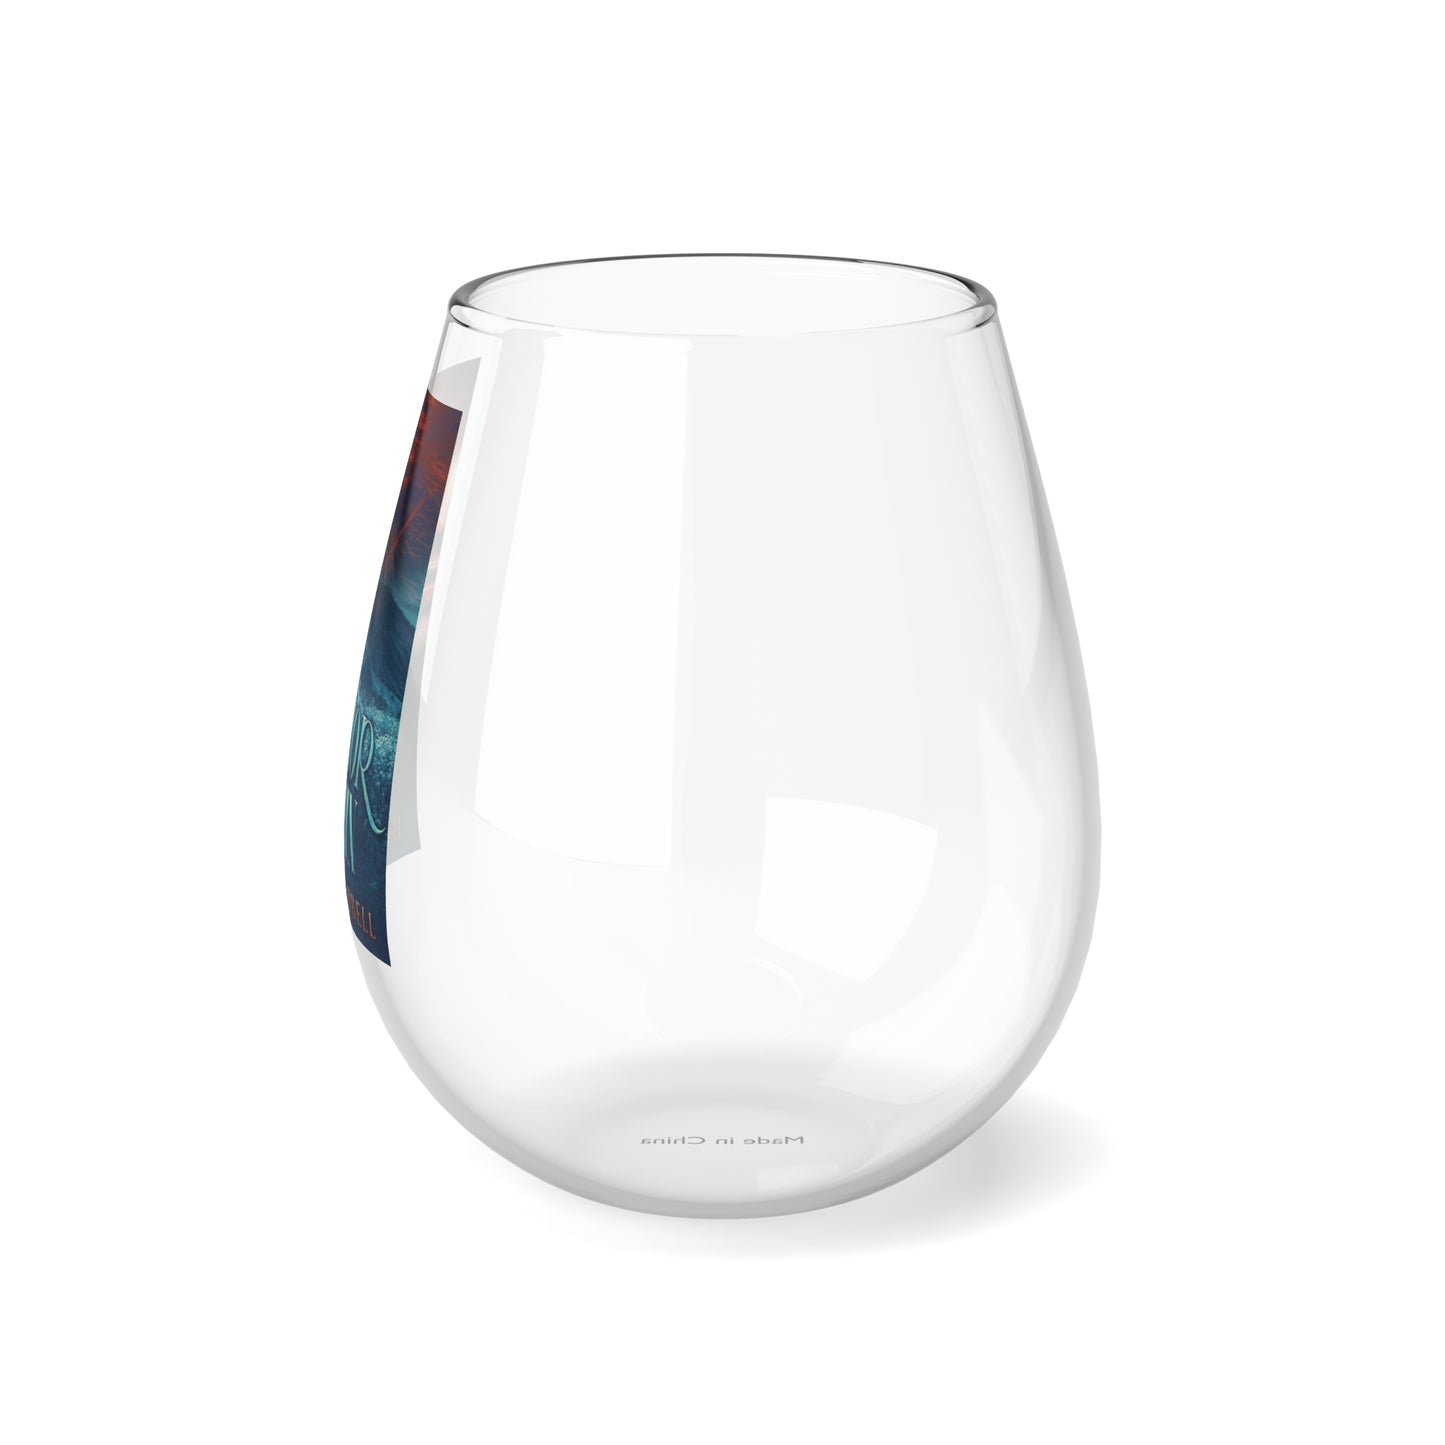 The Warrior Within - Stemless Wine Glass, 11.75oz